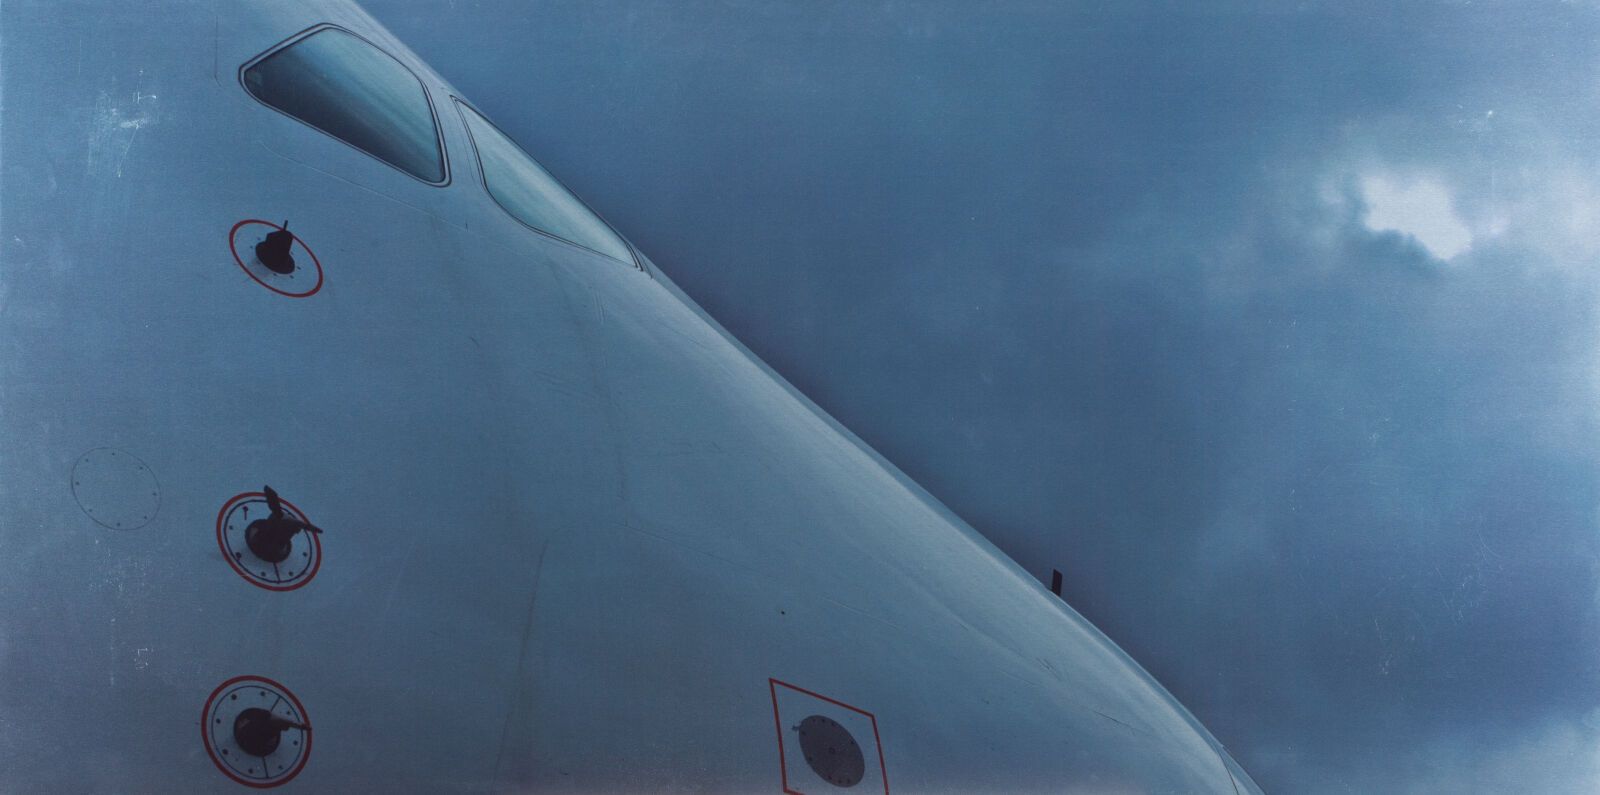 Null A380. Photo A380 Manolo Chretien. Numbered print.